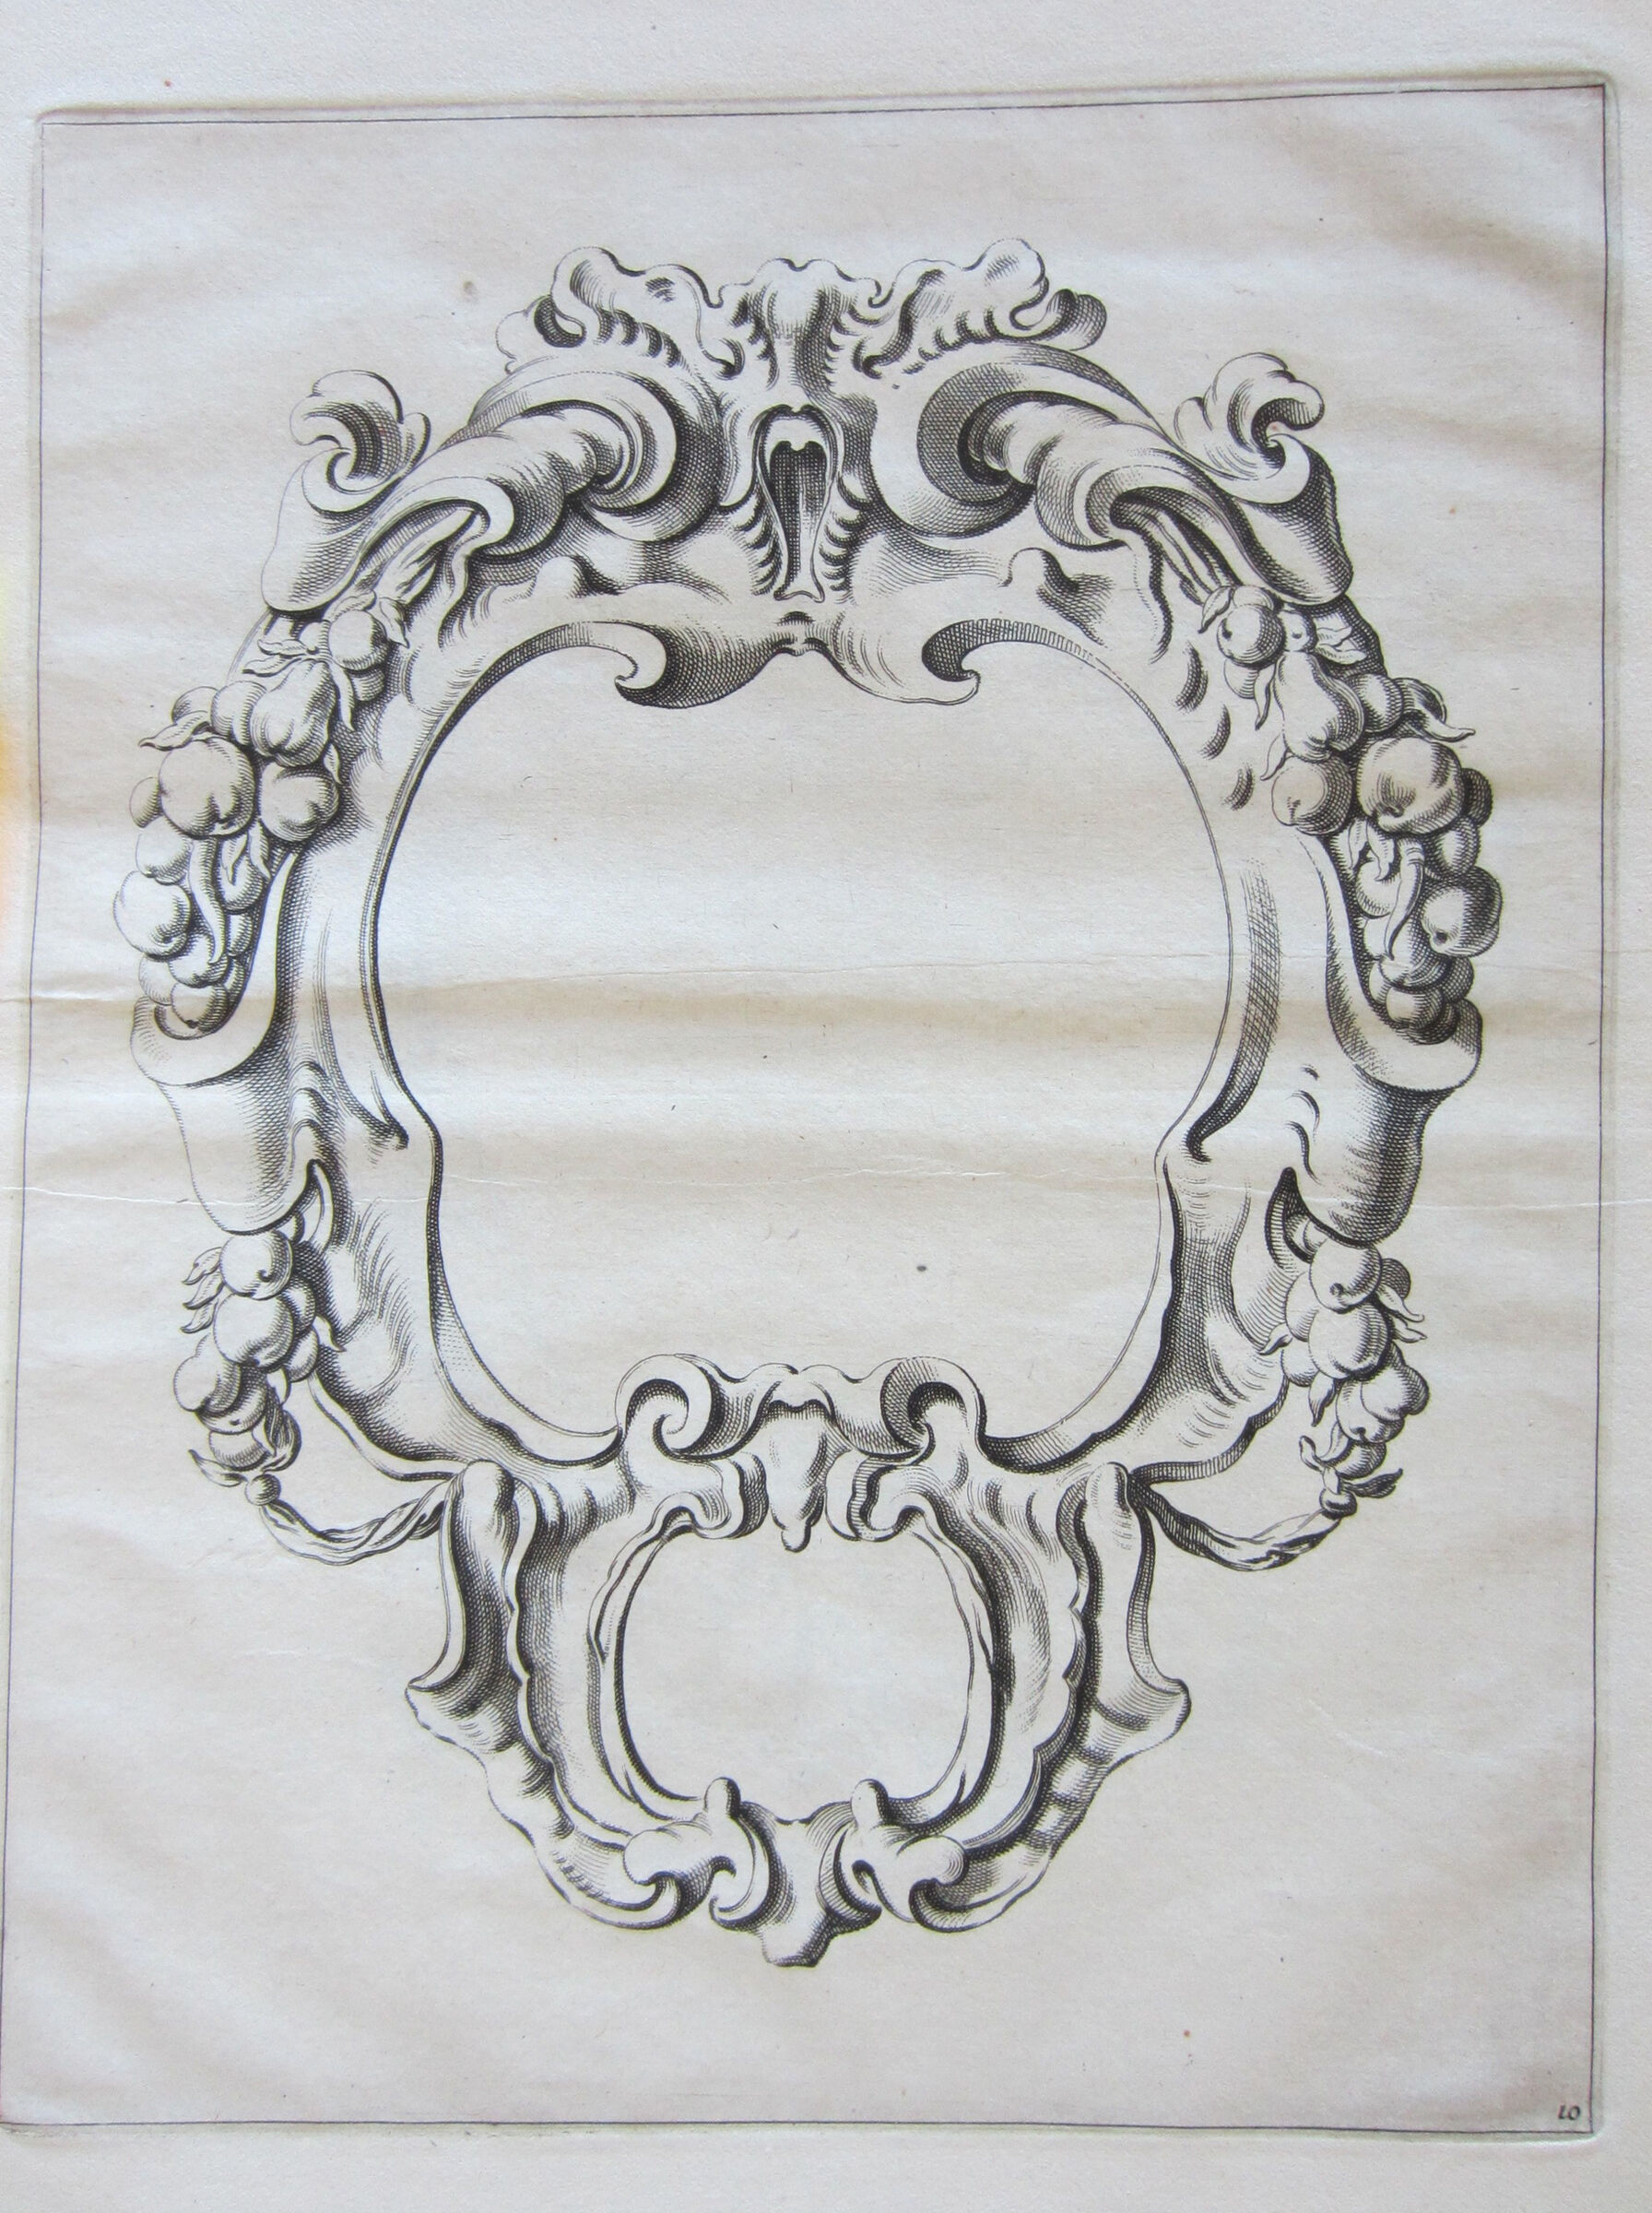 Auricular Cartouche With Two Compartments, Fruit Garlands At The Sides